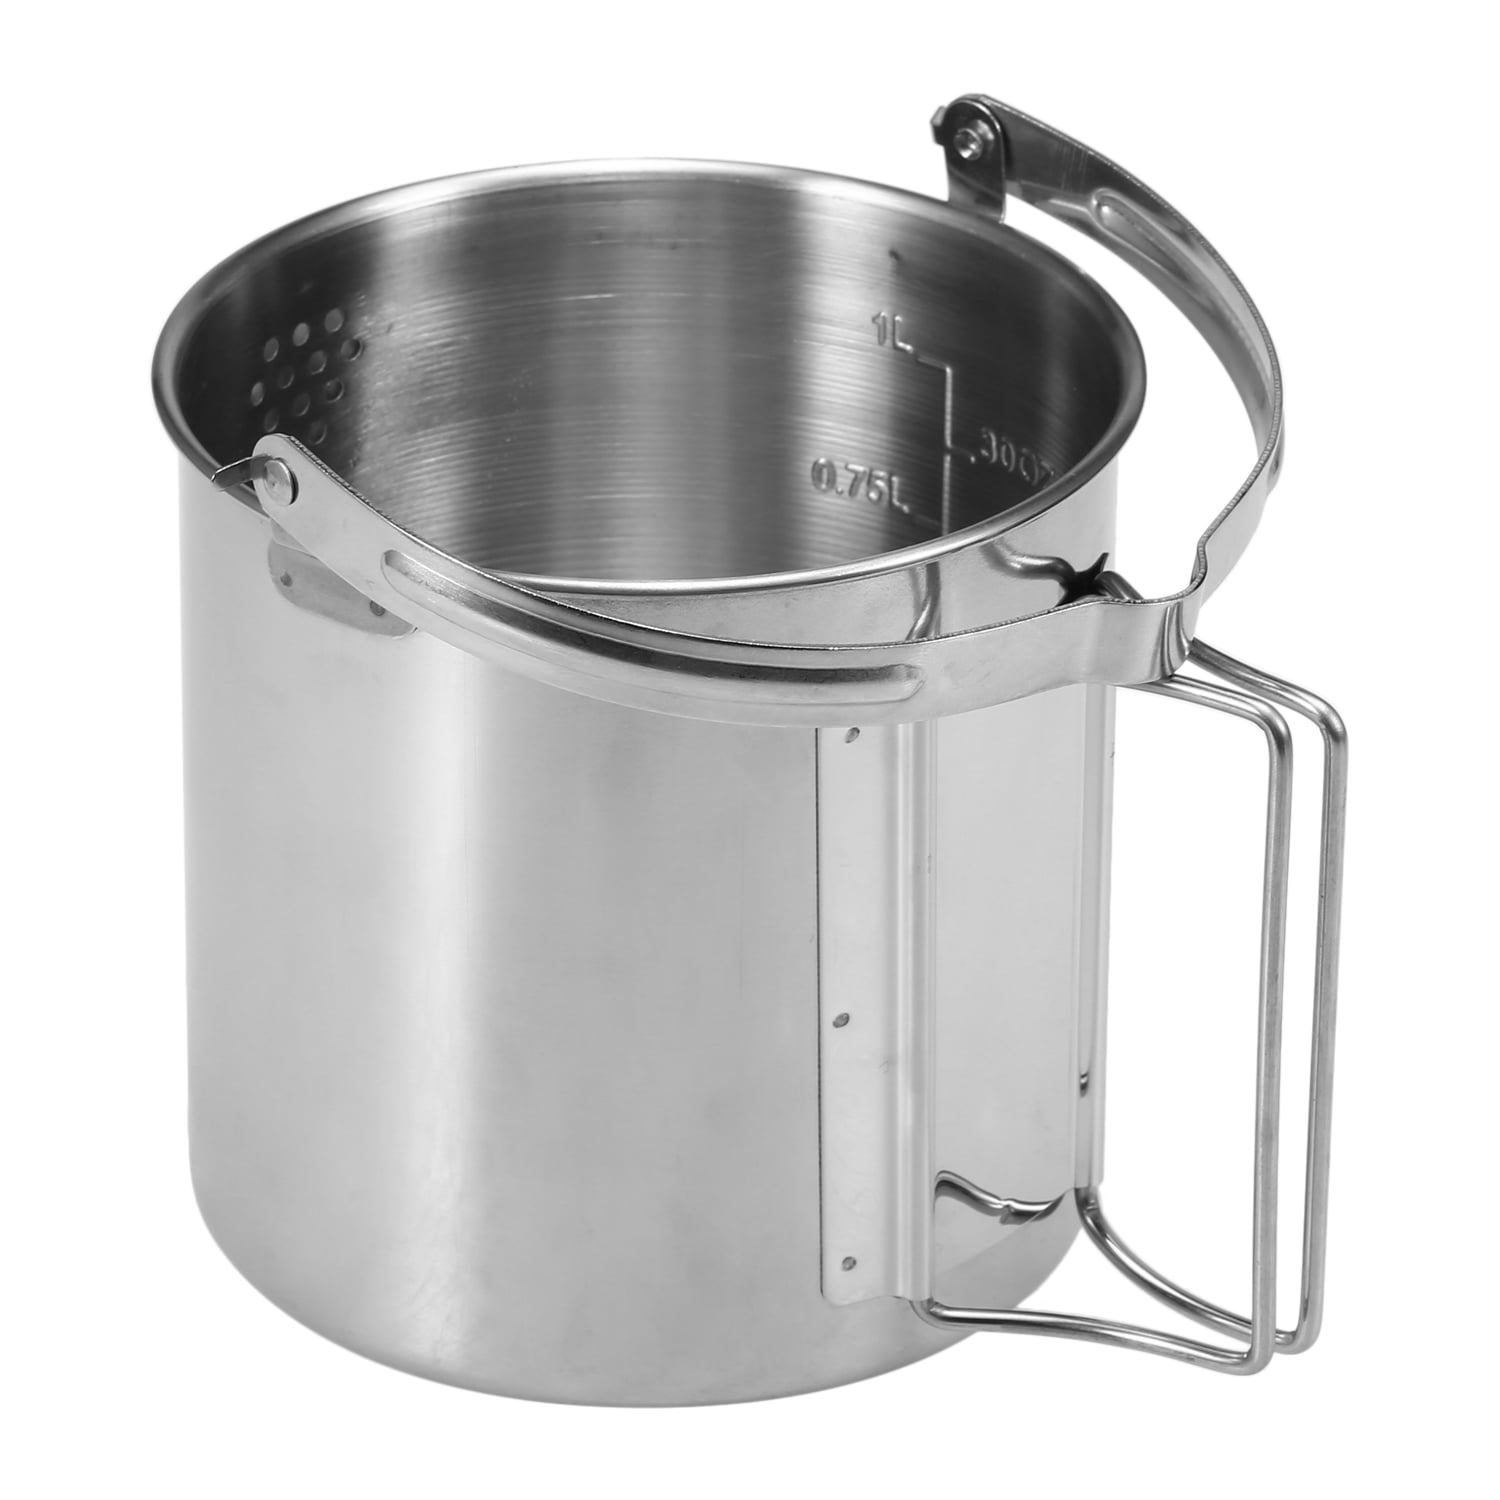 1L Stainless Steel Cooking Kettle Camping Pot with Foldable Handle H1S4 